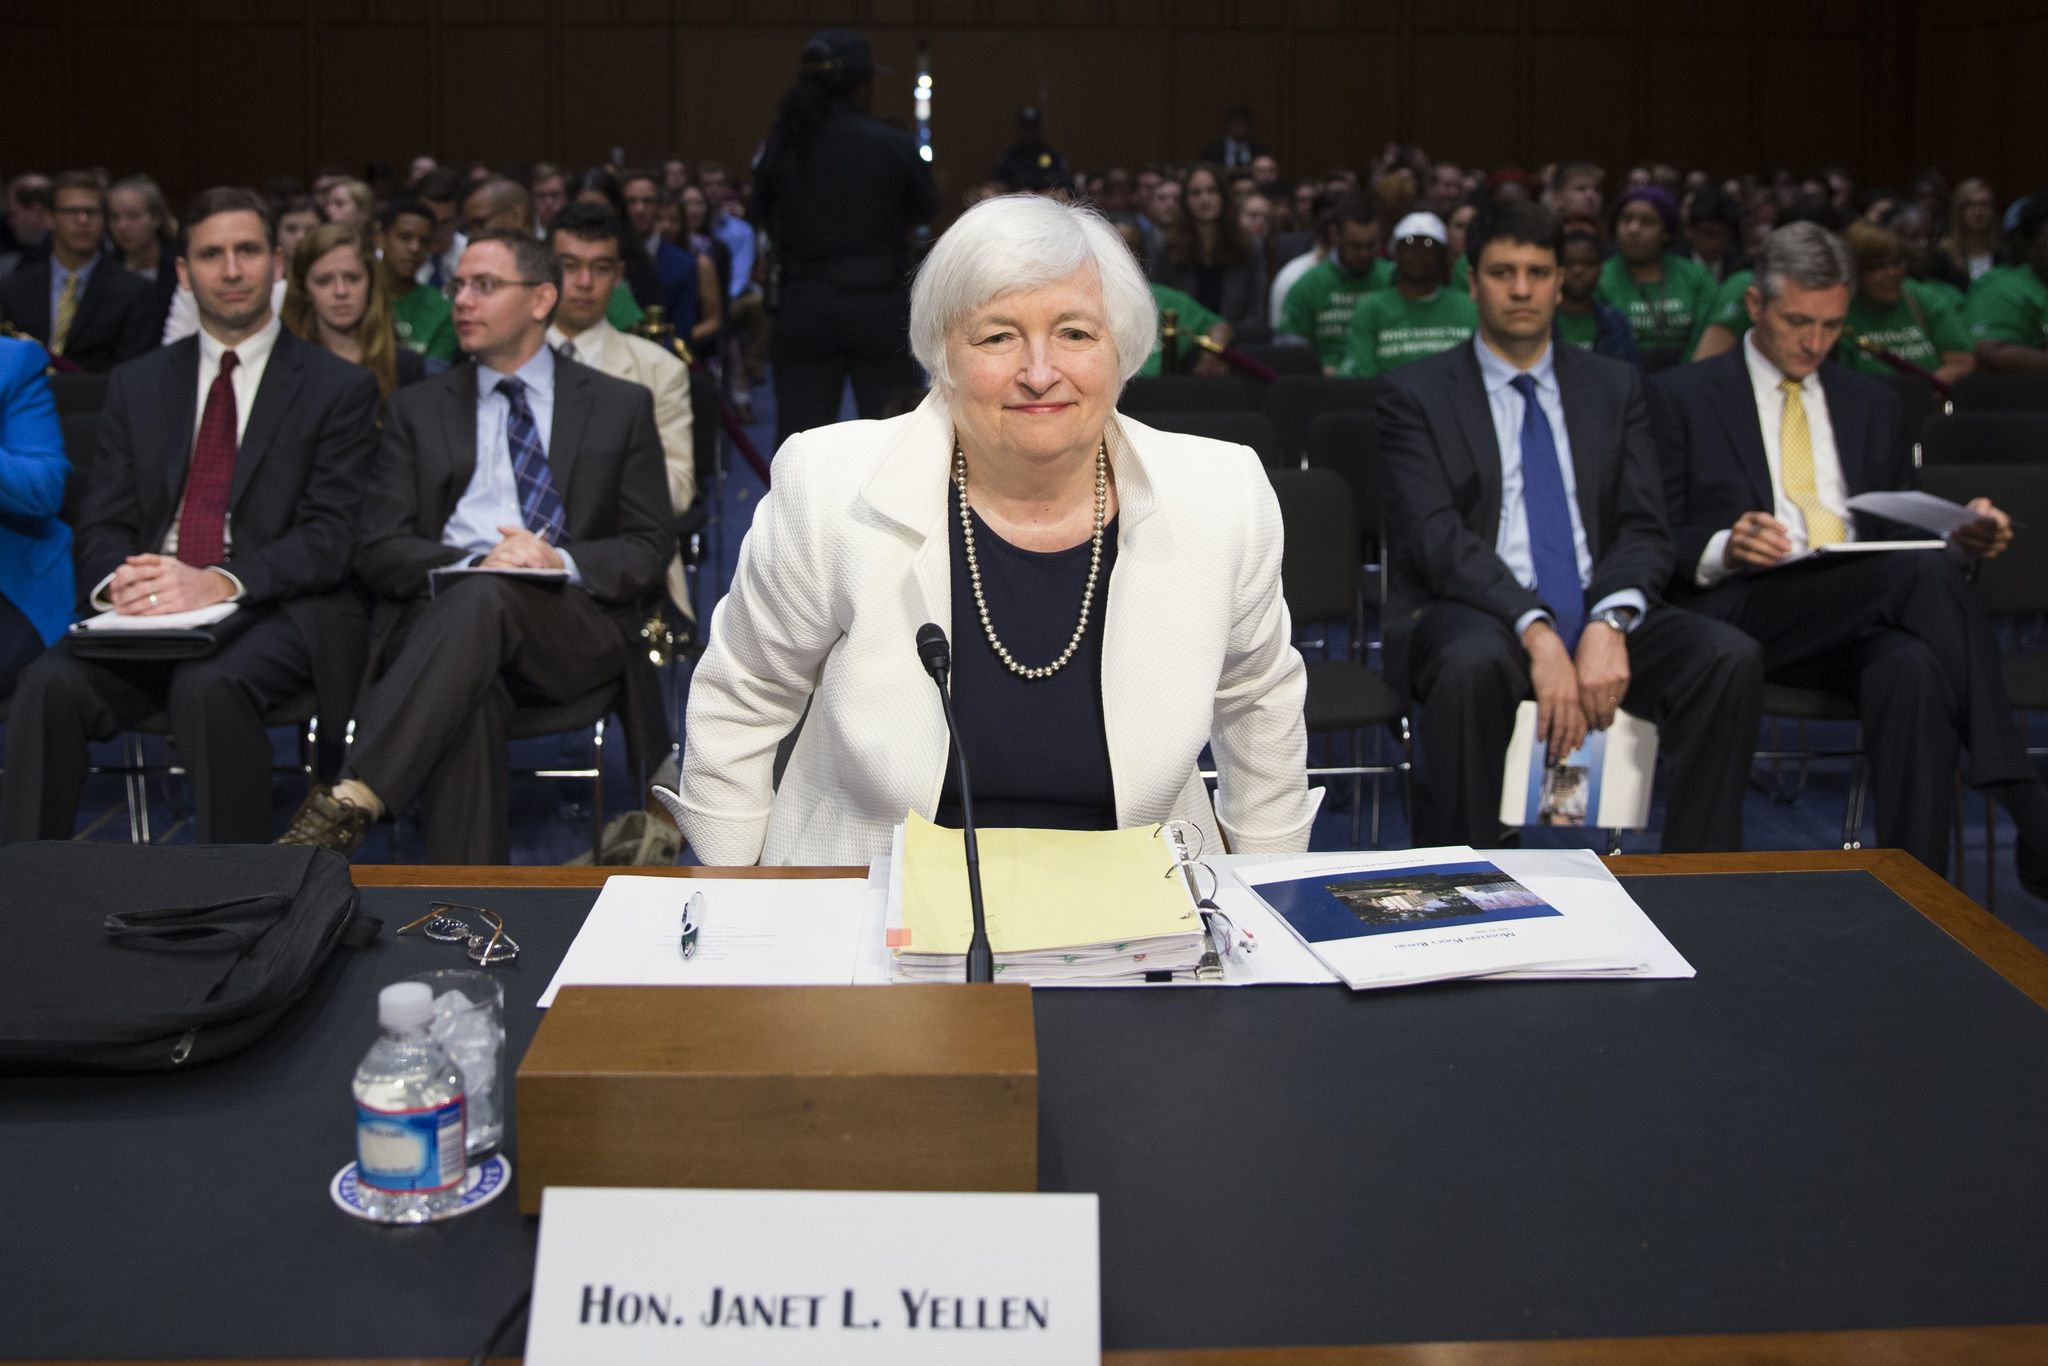 Federal Reserve Chairman Janet Yellen arrives on Capitol Hill in Washington on Tuesday to testify before the Senate Banking Committee. Yellen said the U.S. economy faces a number of uncertainties that require the Fed to proceed cautiously in raising interest rates.